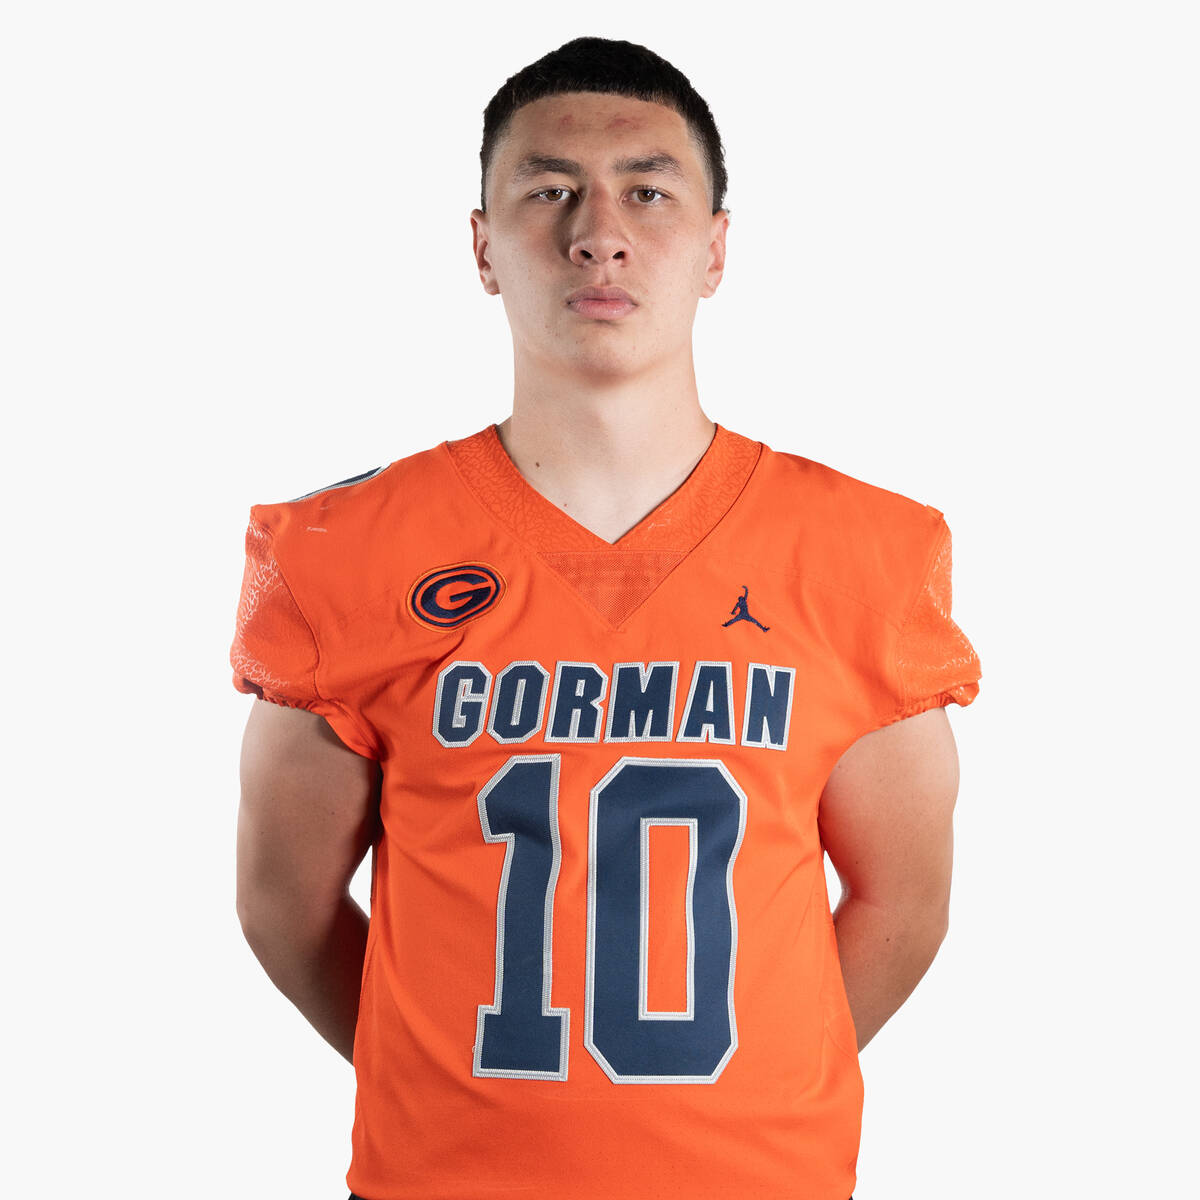 Bishop Gorman's Charles Correa is a member of the Nevada Preps All-Southern Nevada football team.